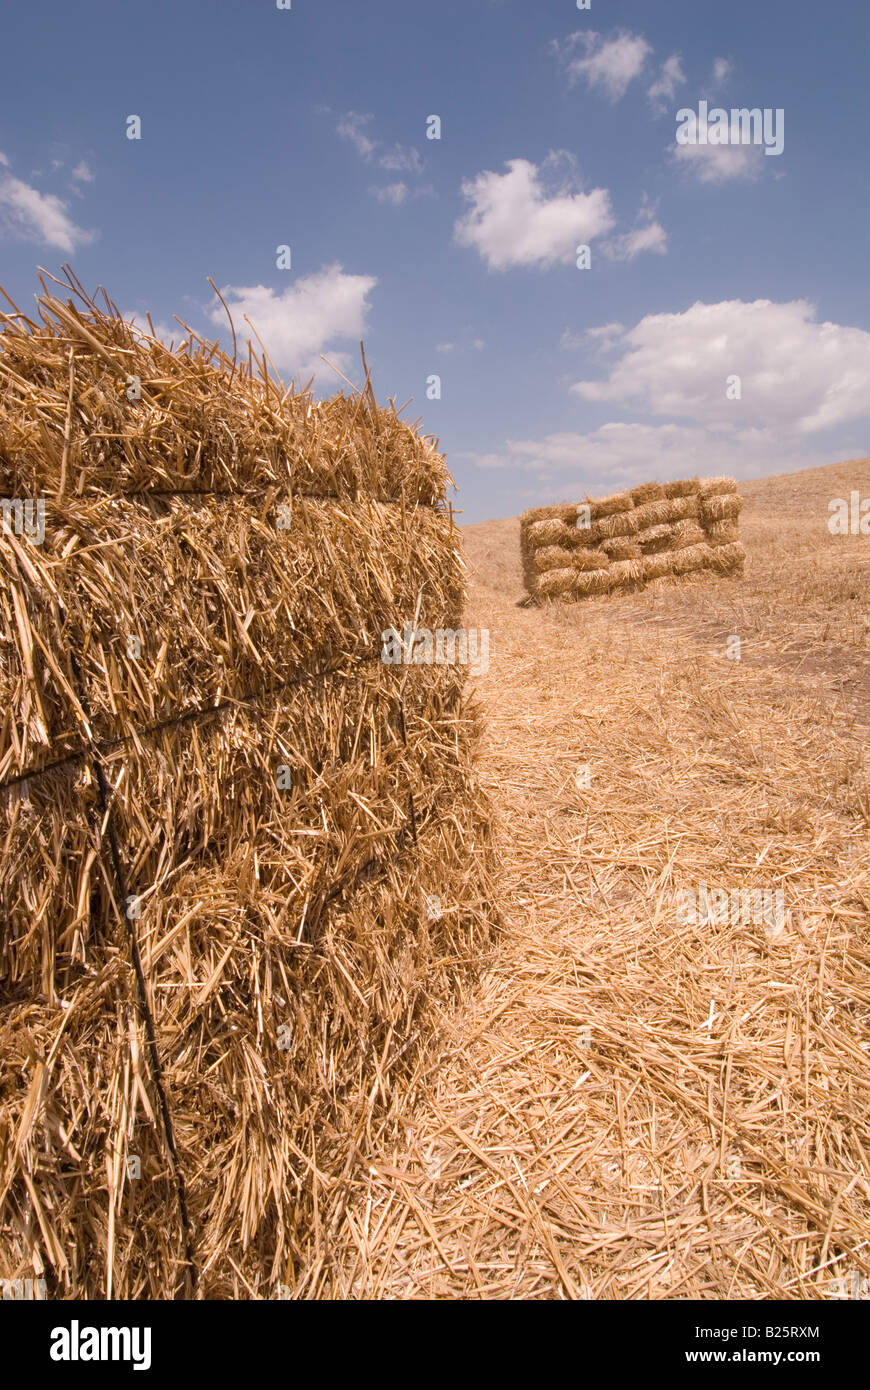 Straw harvested in Andalusia, Spain Stock Photo